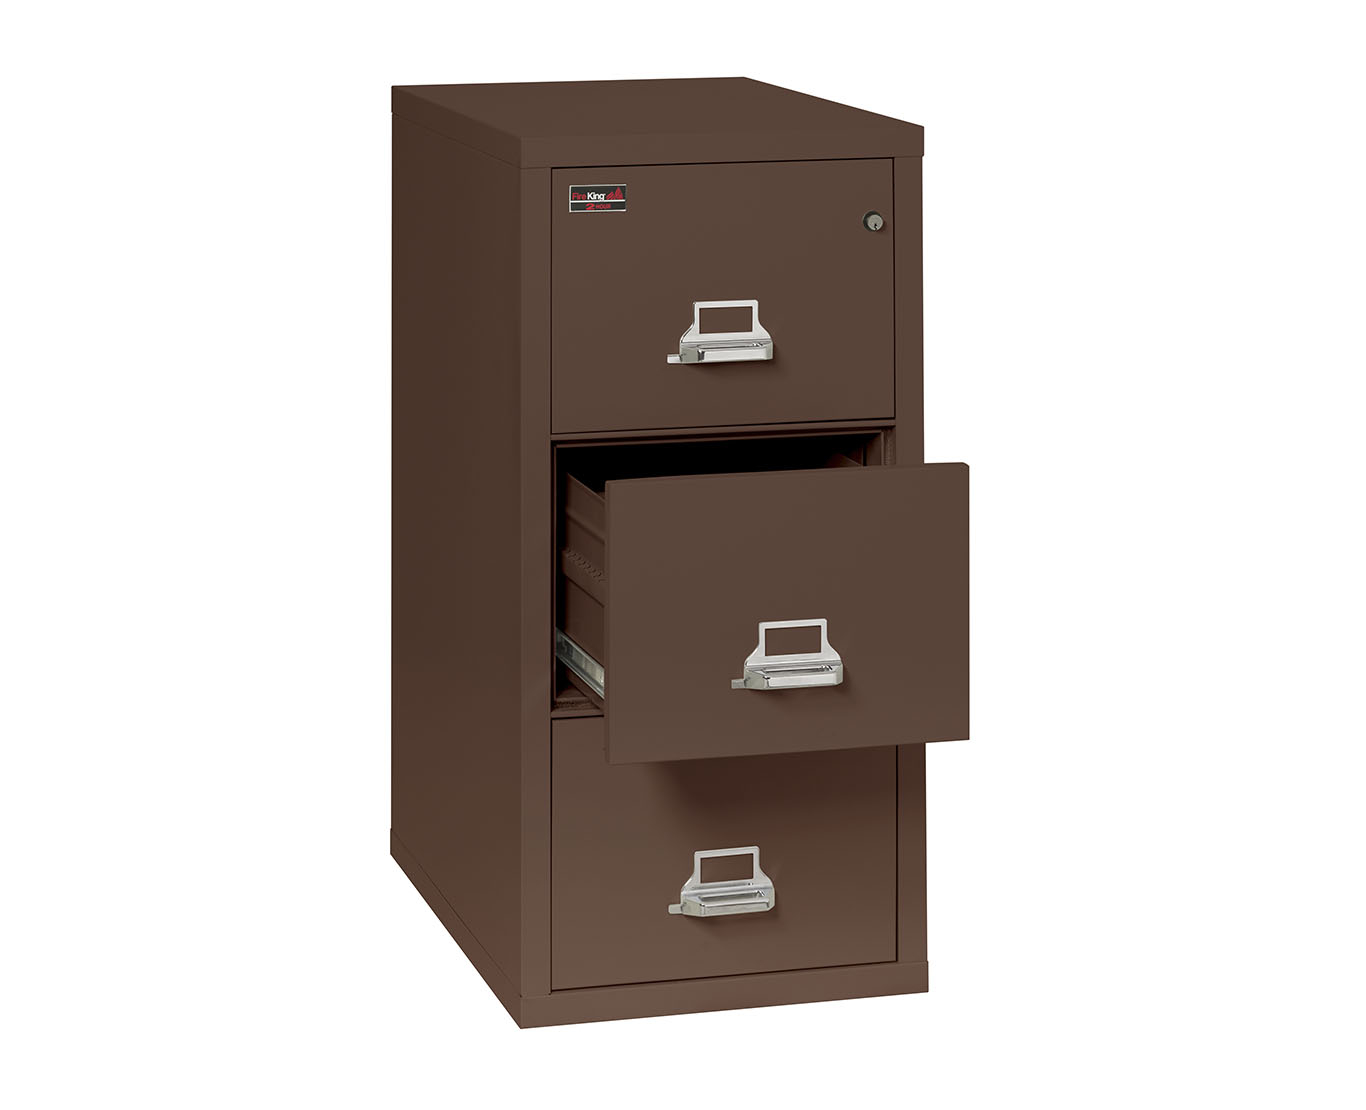 Fireproof File Cabinets 2 Hour Rated Fireking pertaining to size 1366 X 1110